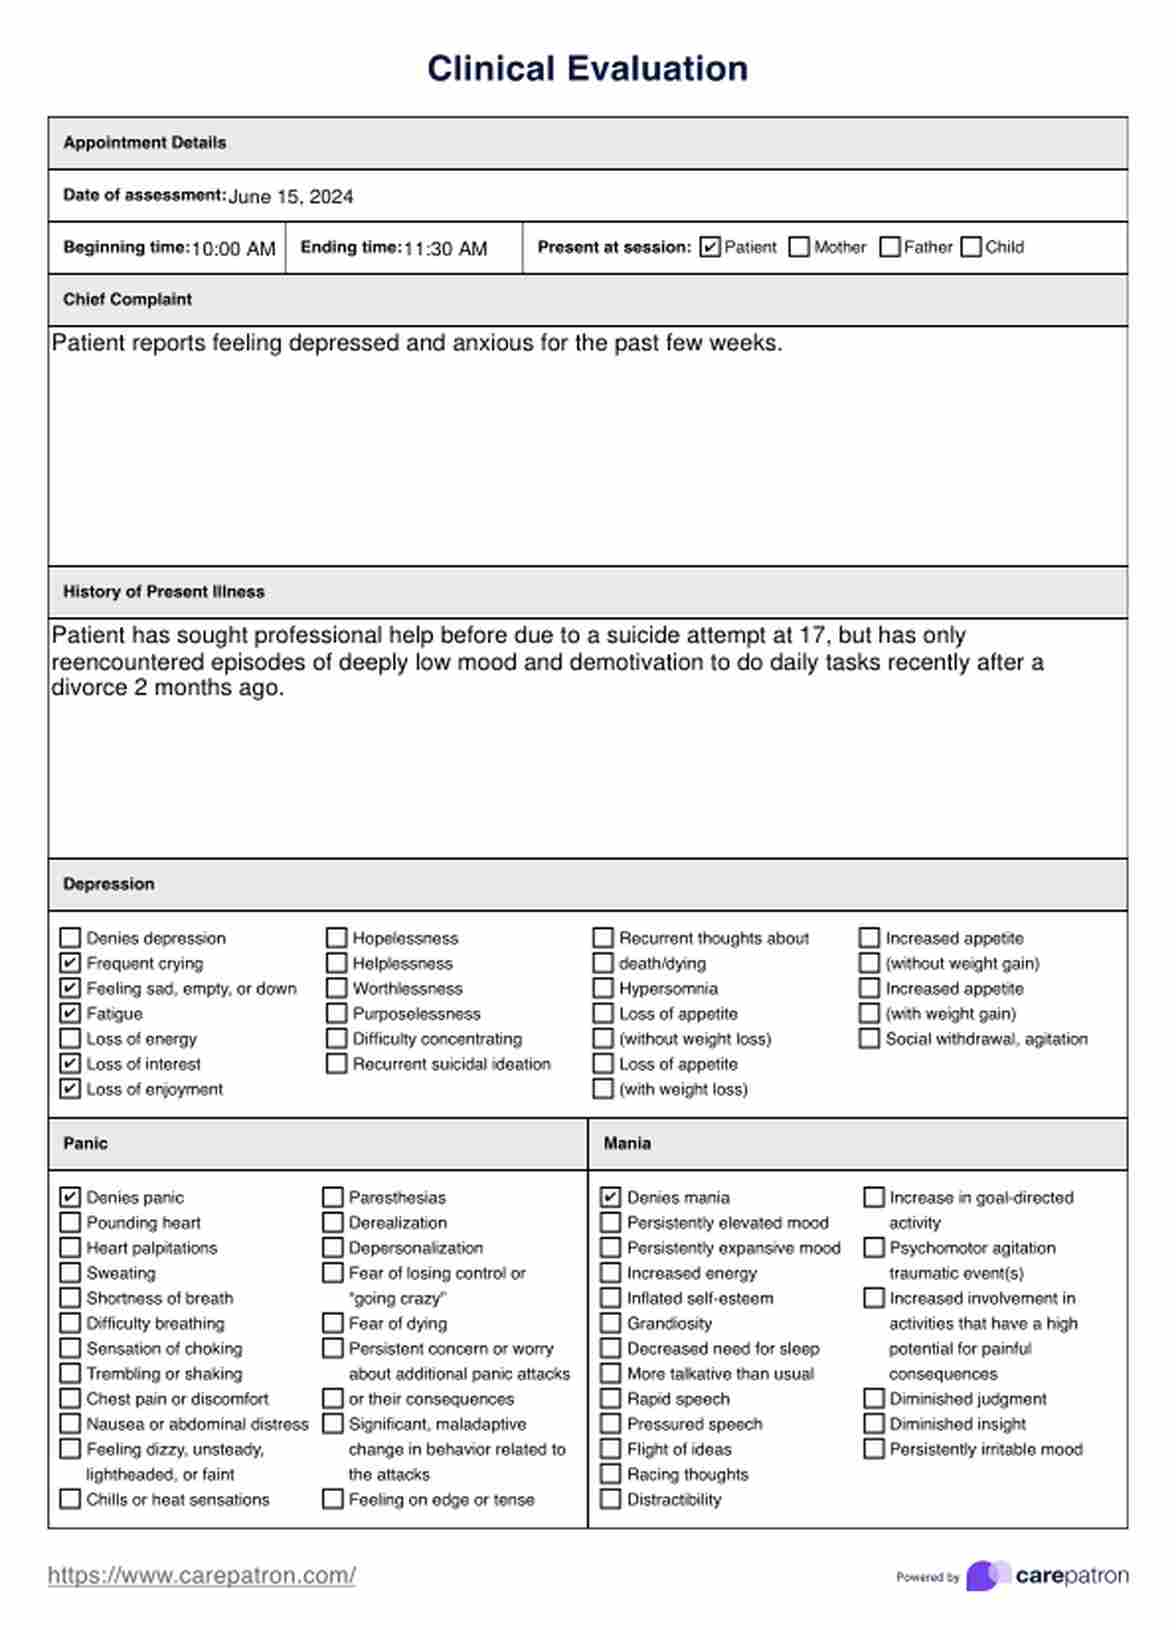 Clinical Evaluation PDF Example